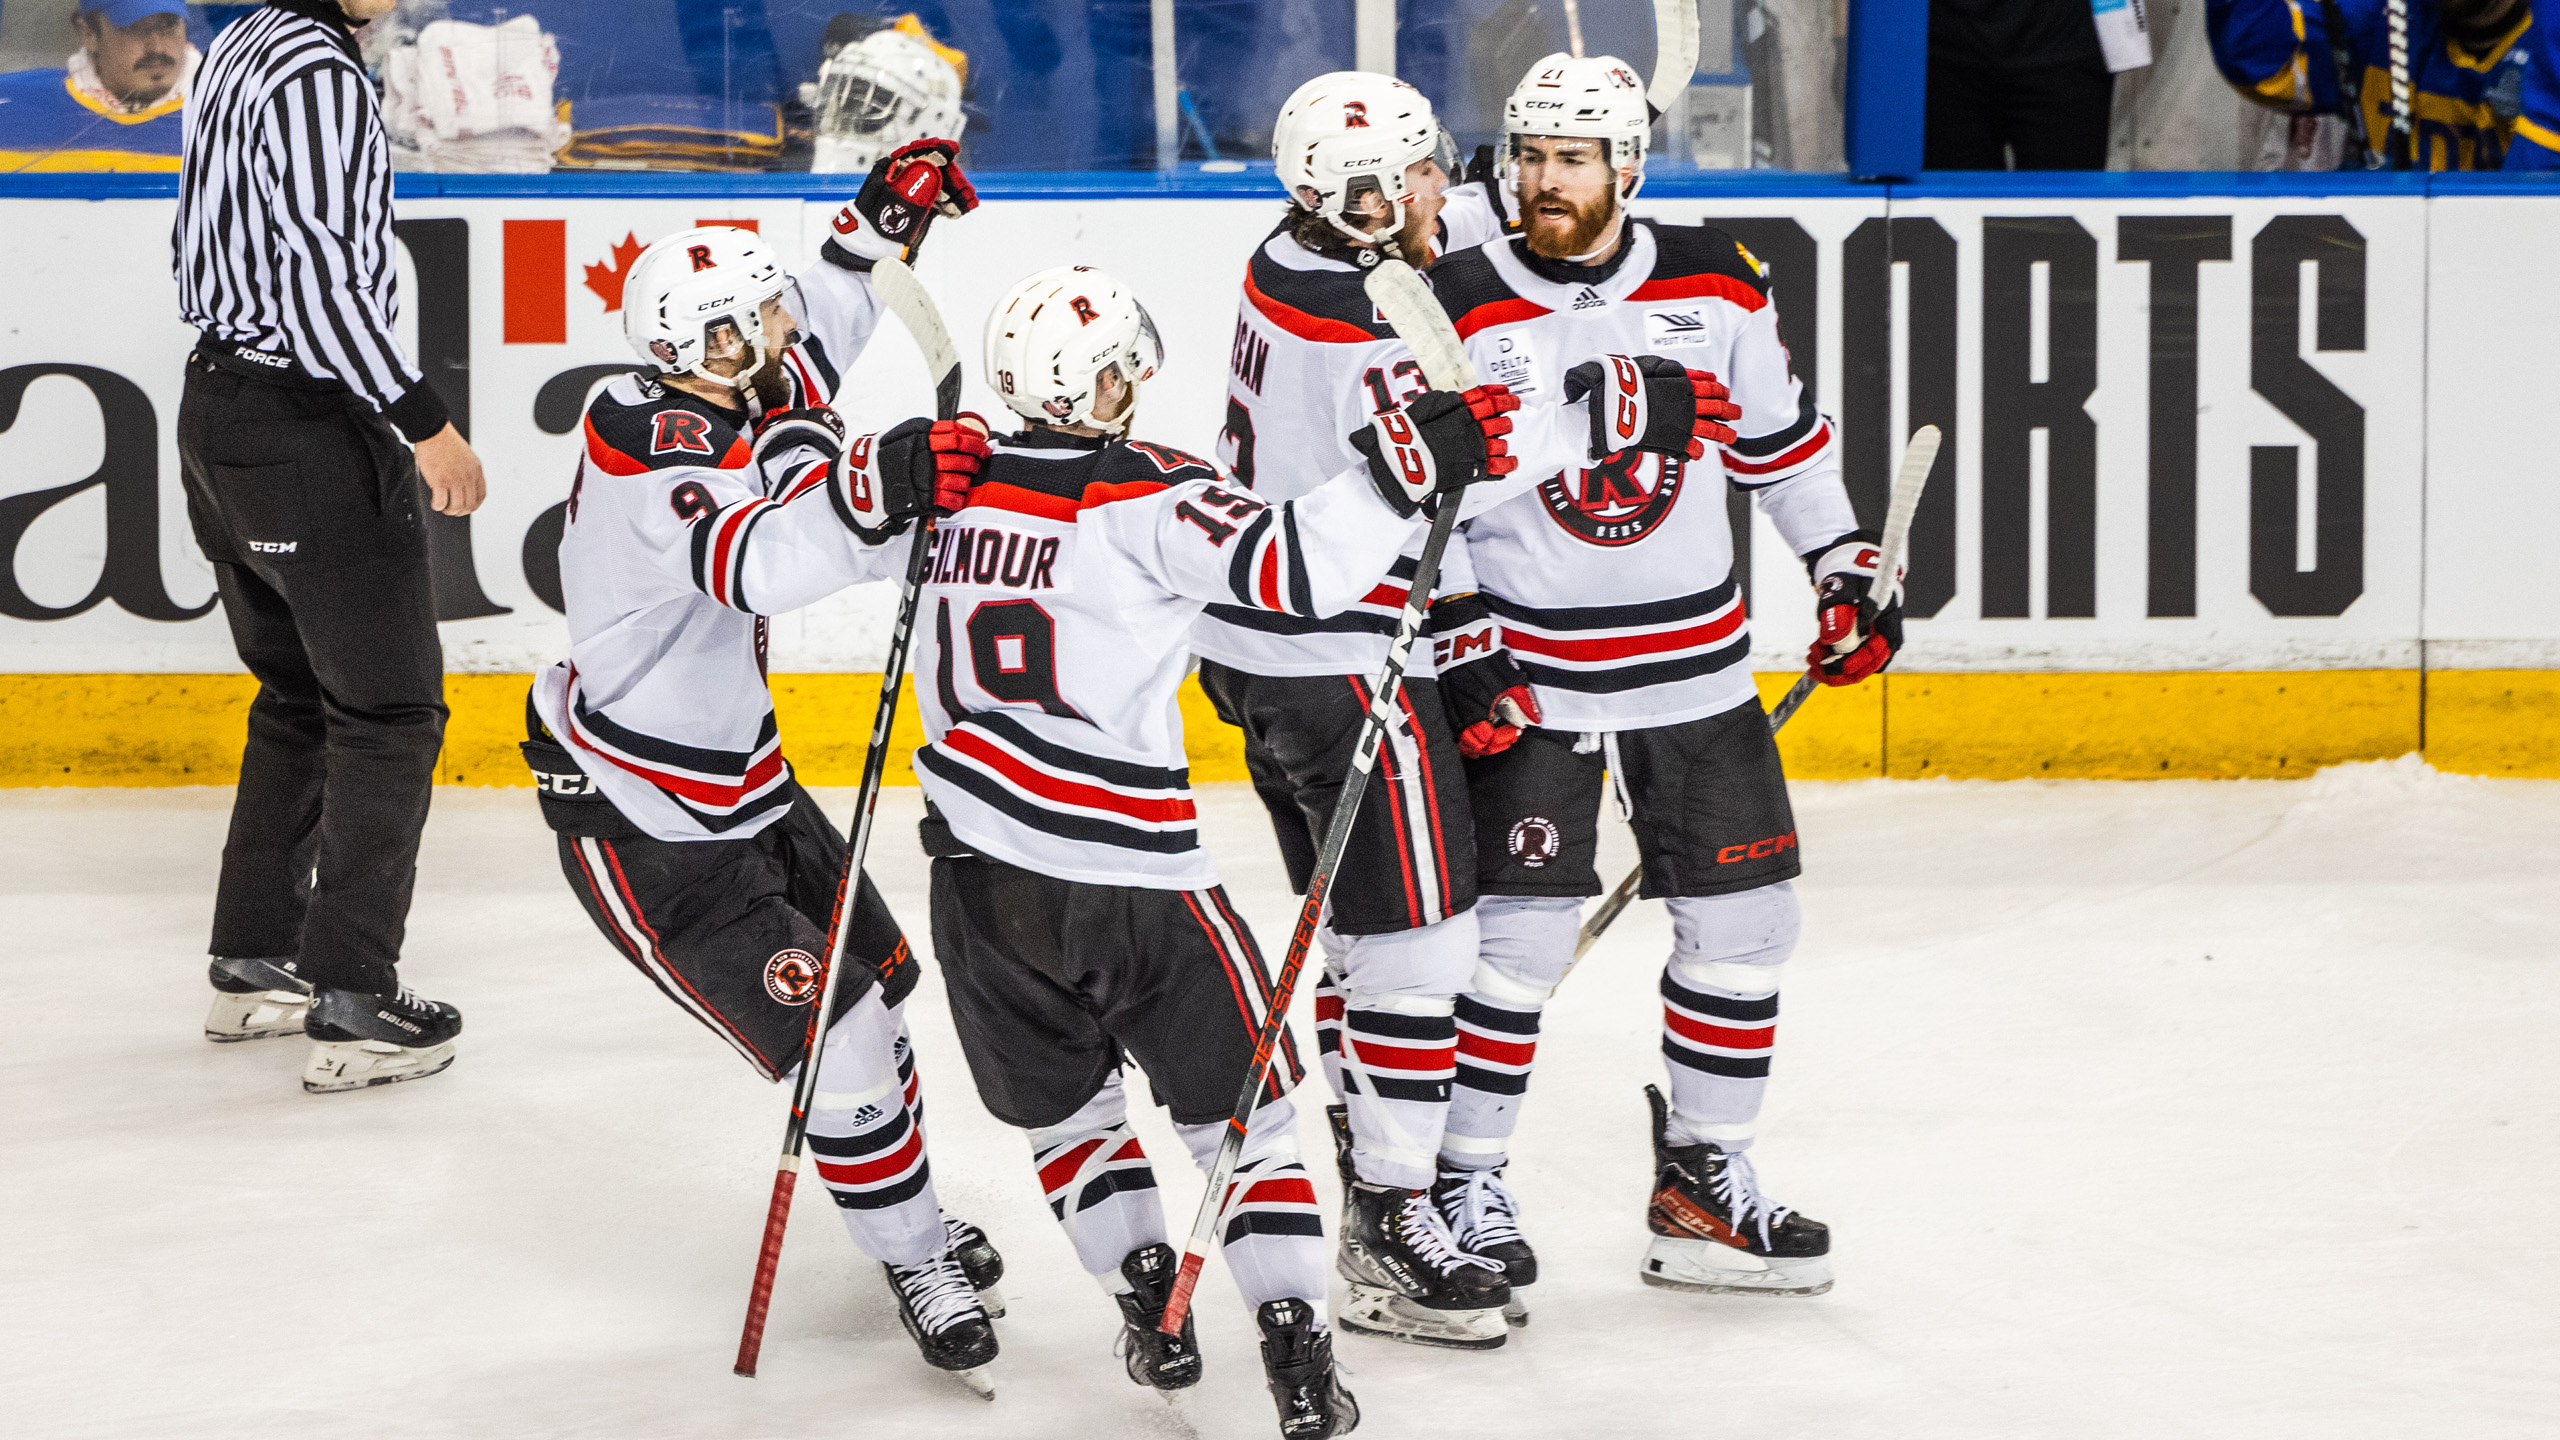 UNB players celebrate on the ice